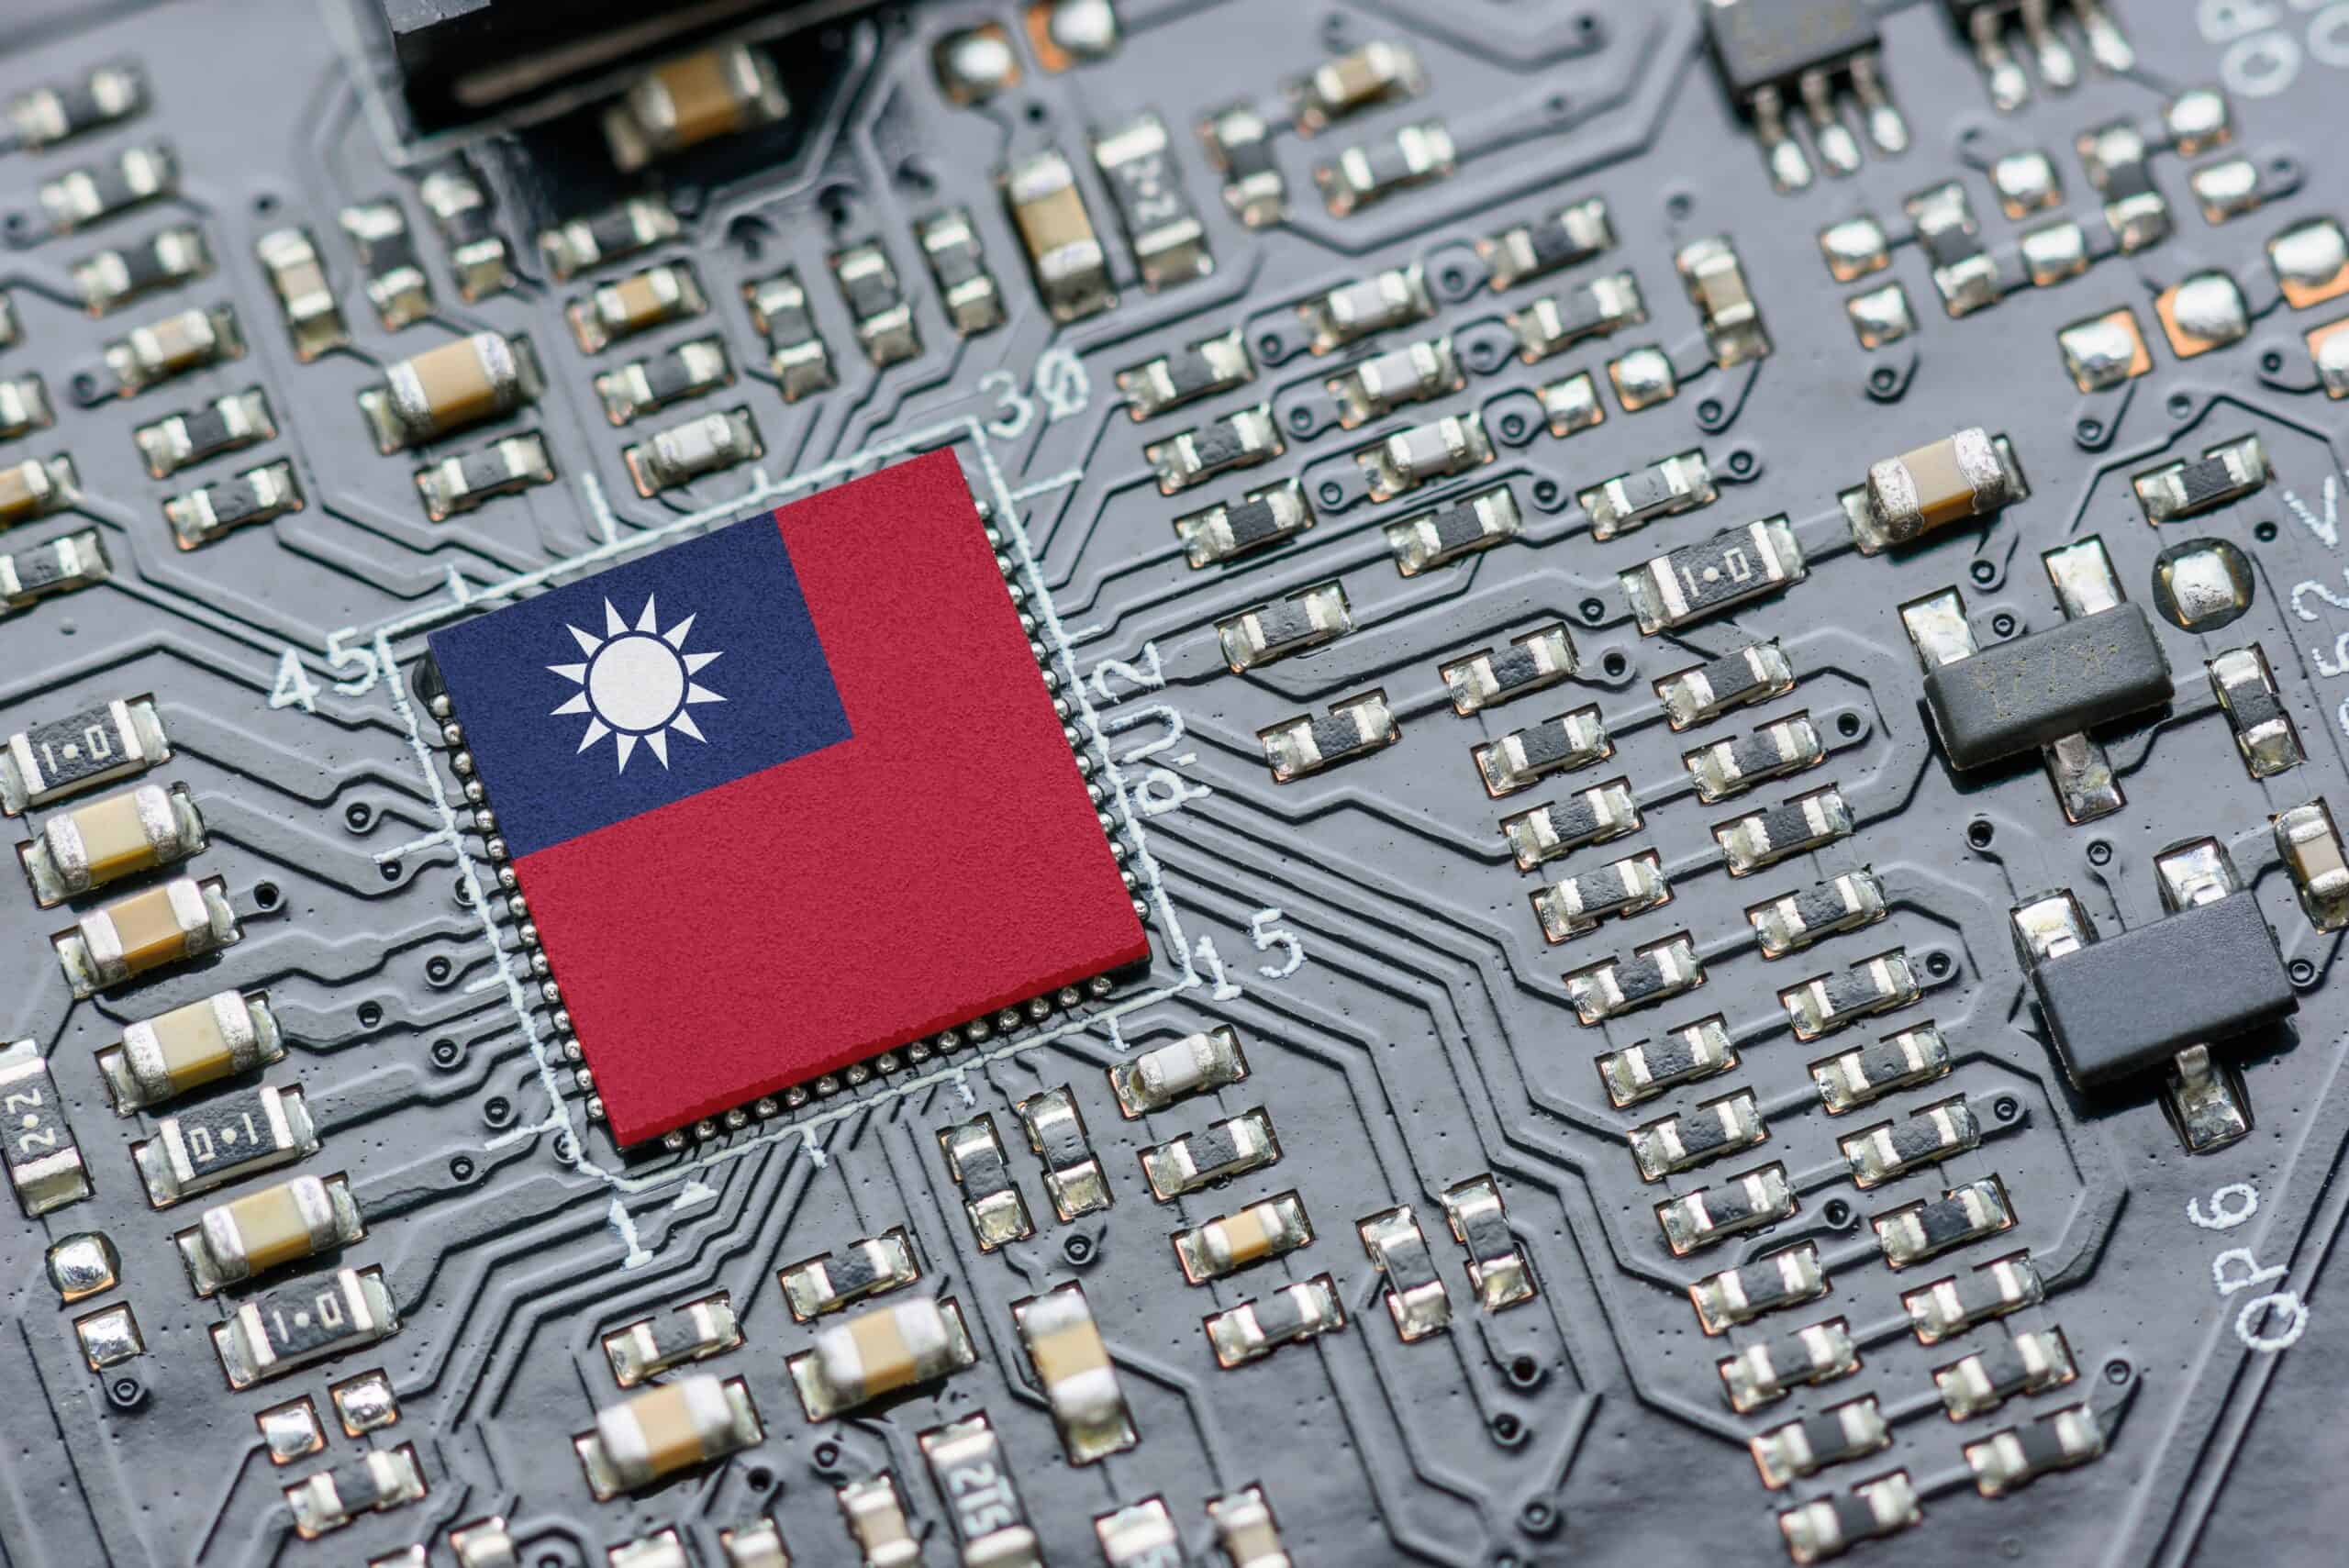 Taiwan-chip-industry-header-scaled